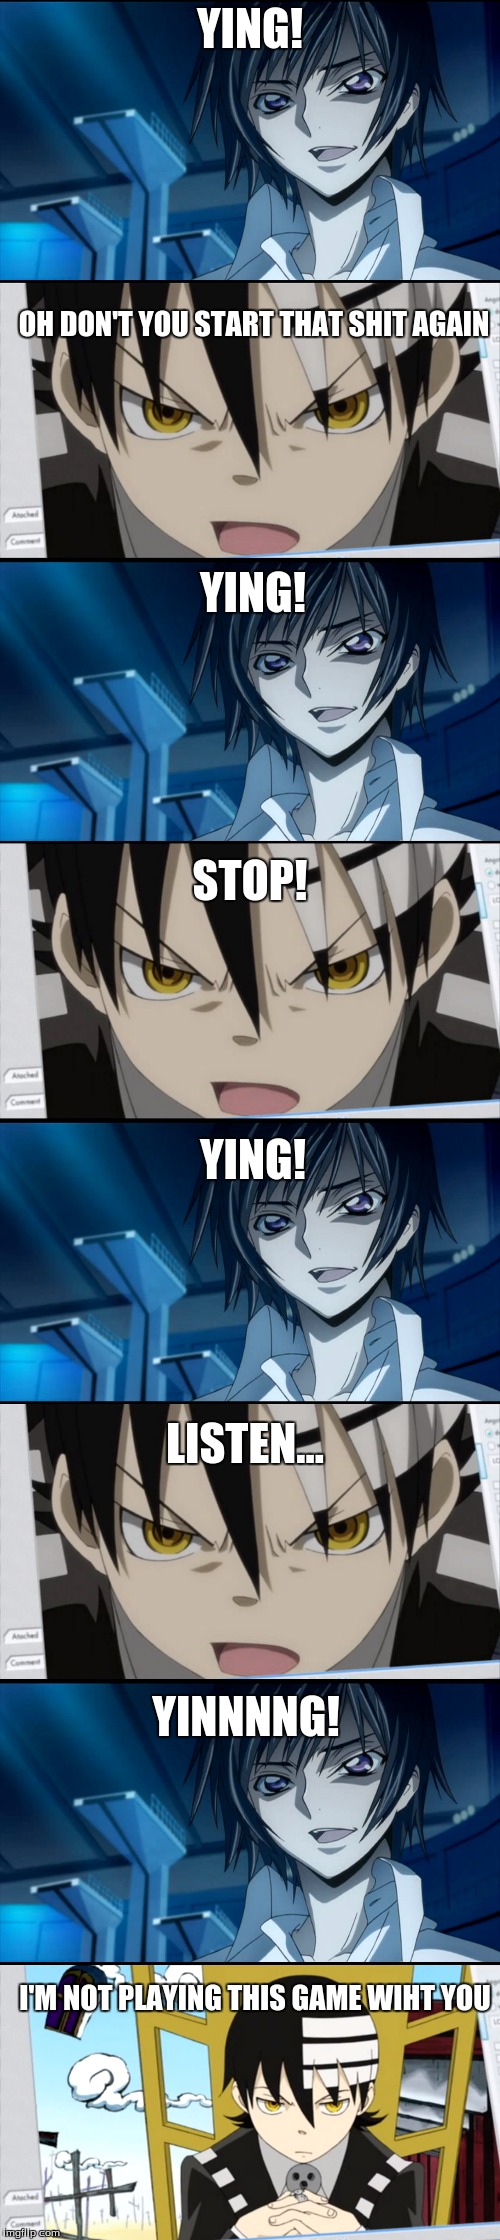 We all have that family memeber | YING! OH DON'T YOU START THAT SHIT AGAIN; YING! STOP! YING! LISTEN... YINNNNG! I'M NOT PLAYING THIS GAME WIHT YOU | image tagged in anime,code geass,soul eater,abridged,family,death the kid | made w/ Imgflip meme maker